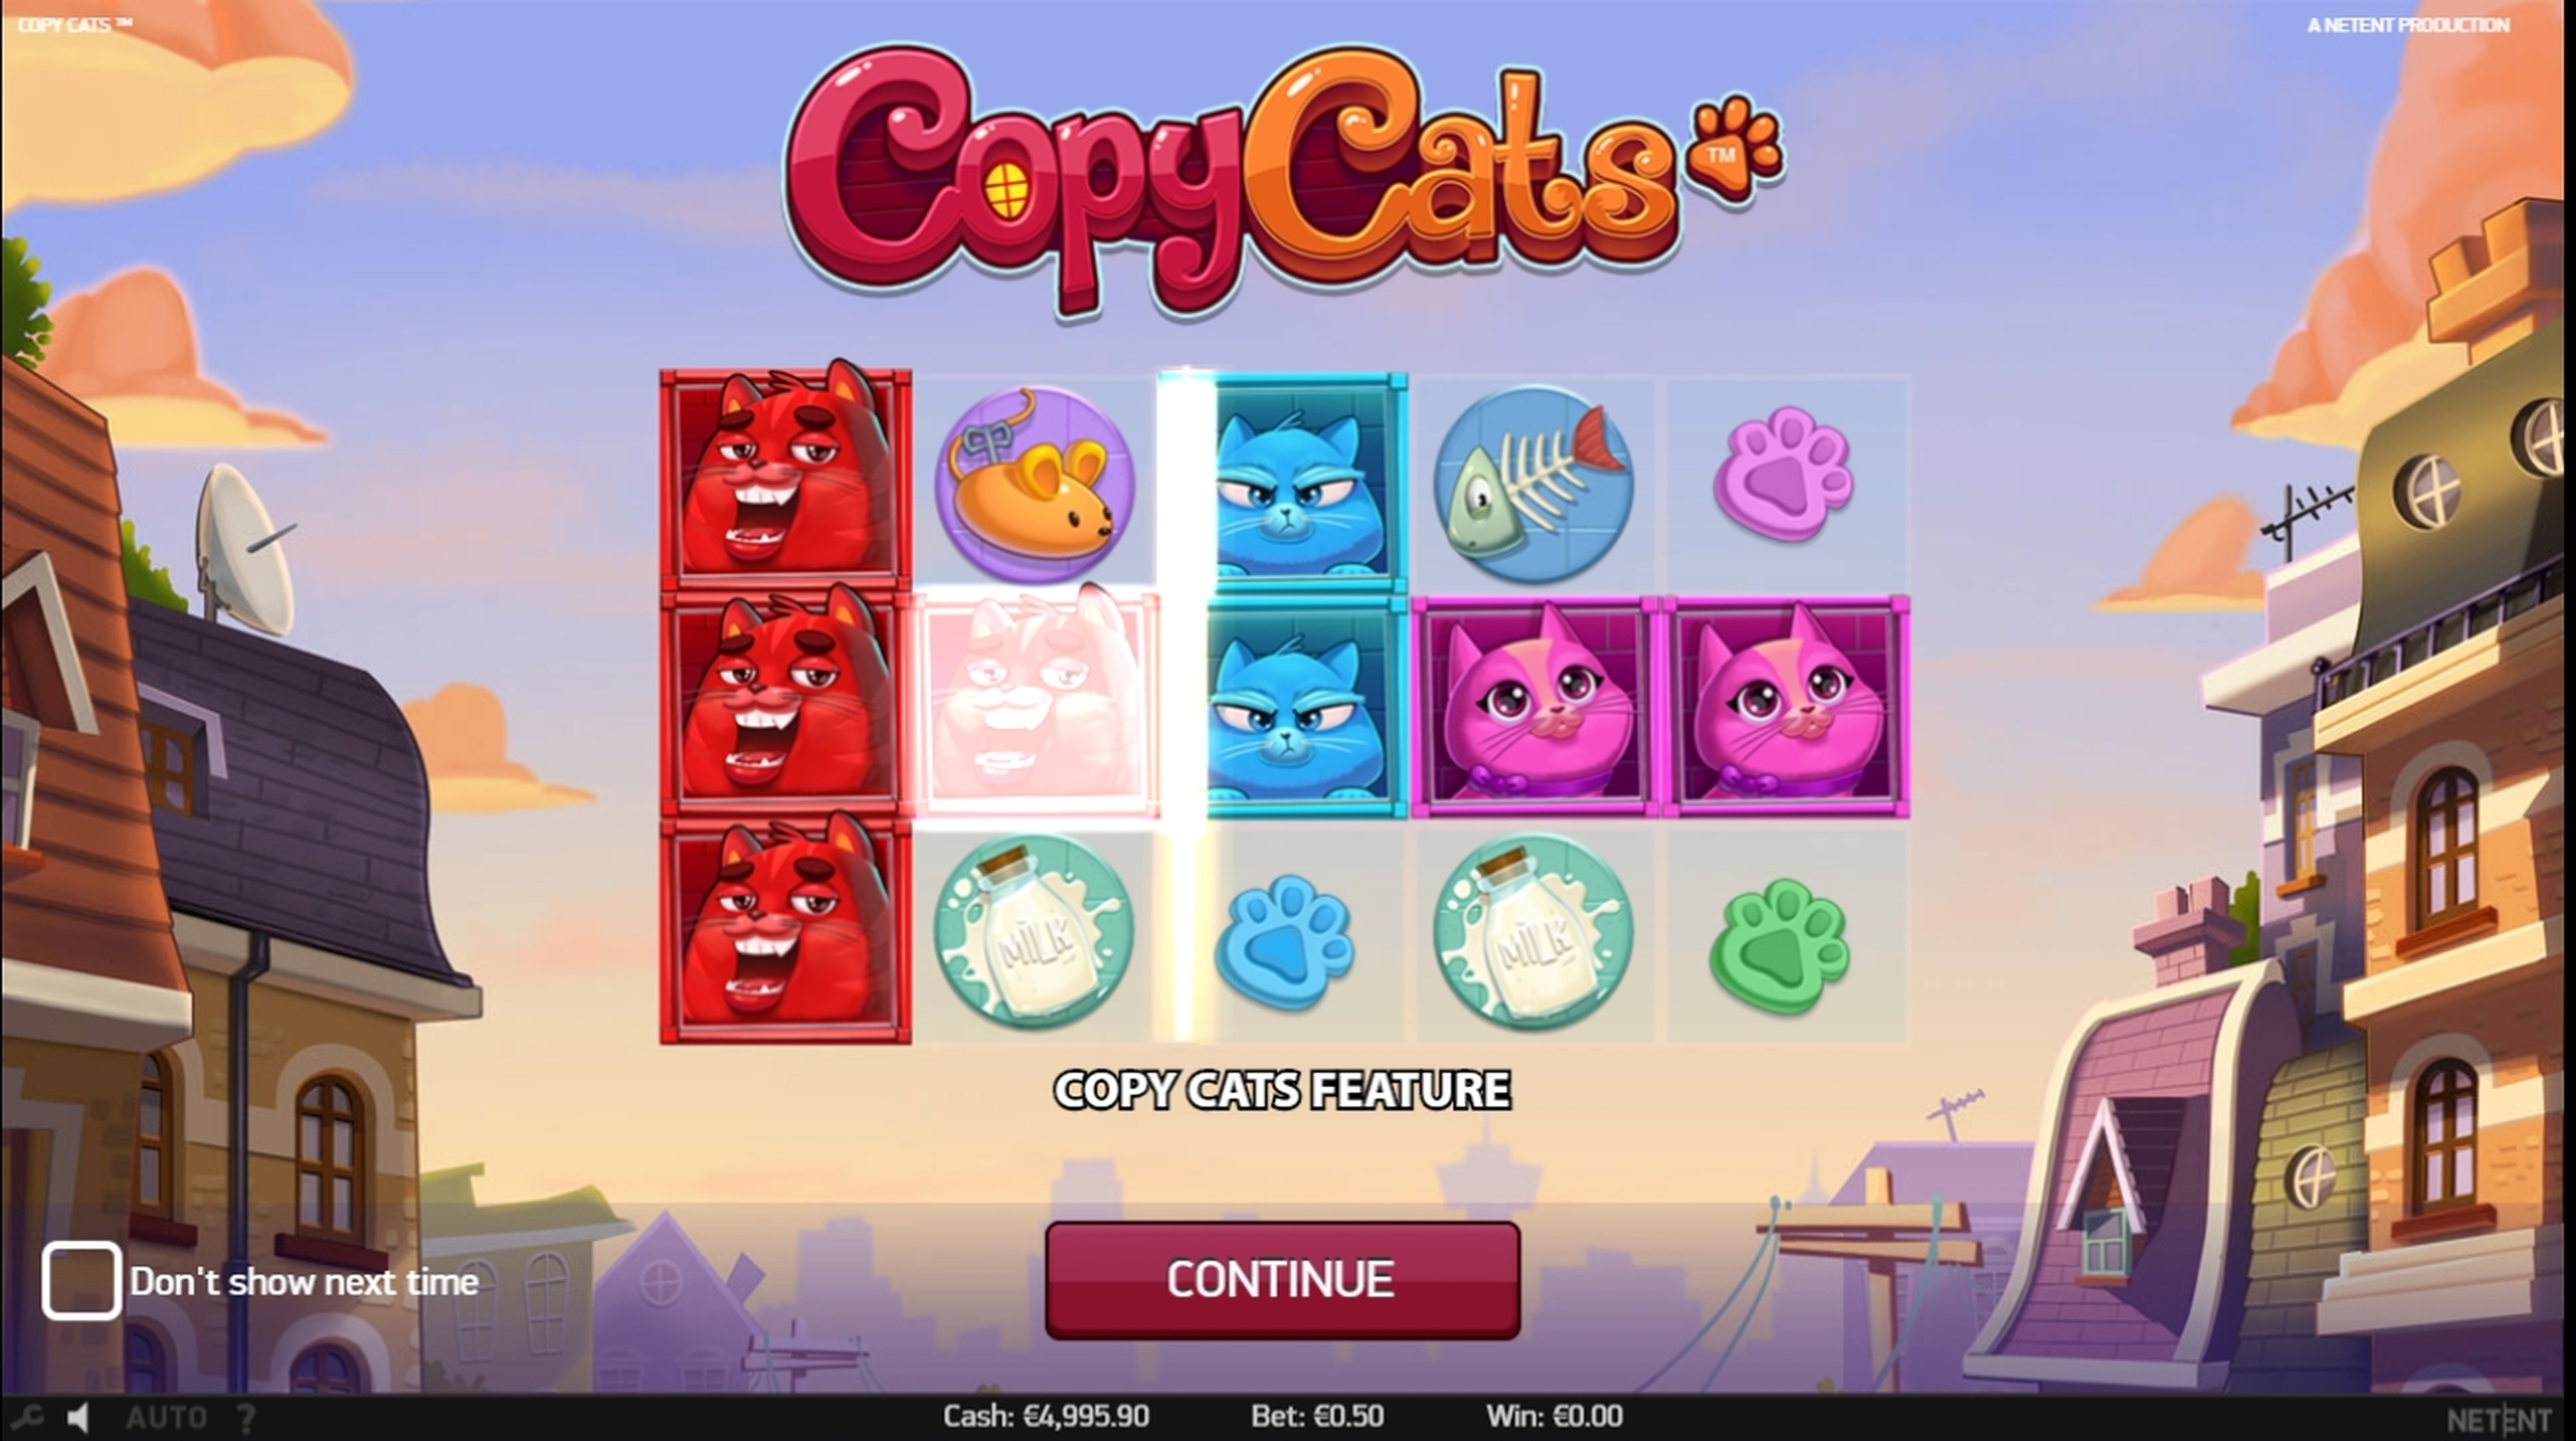 Play Copy Cats Free Casino Slot Game by NetEnt